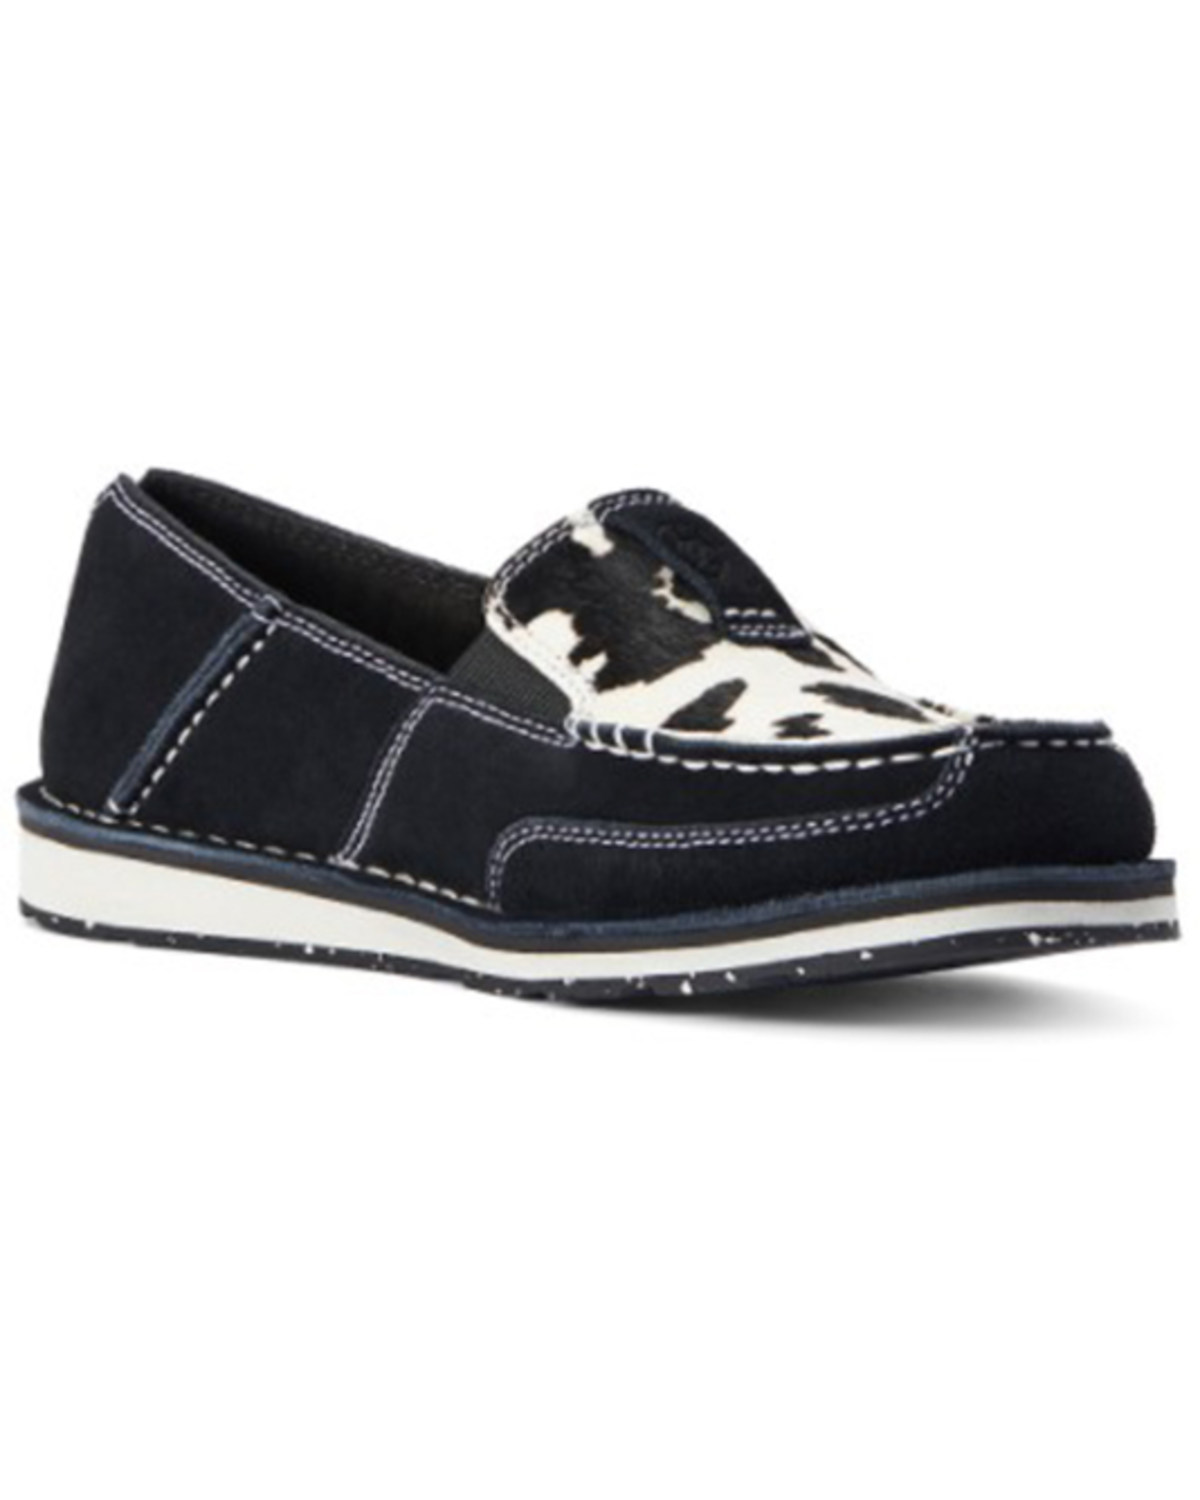 Ariat Women's Suede Cow Print Hair-On Casual Slip-On Cruiser - Moc Toe